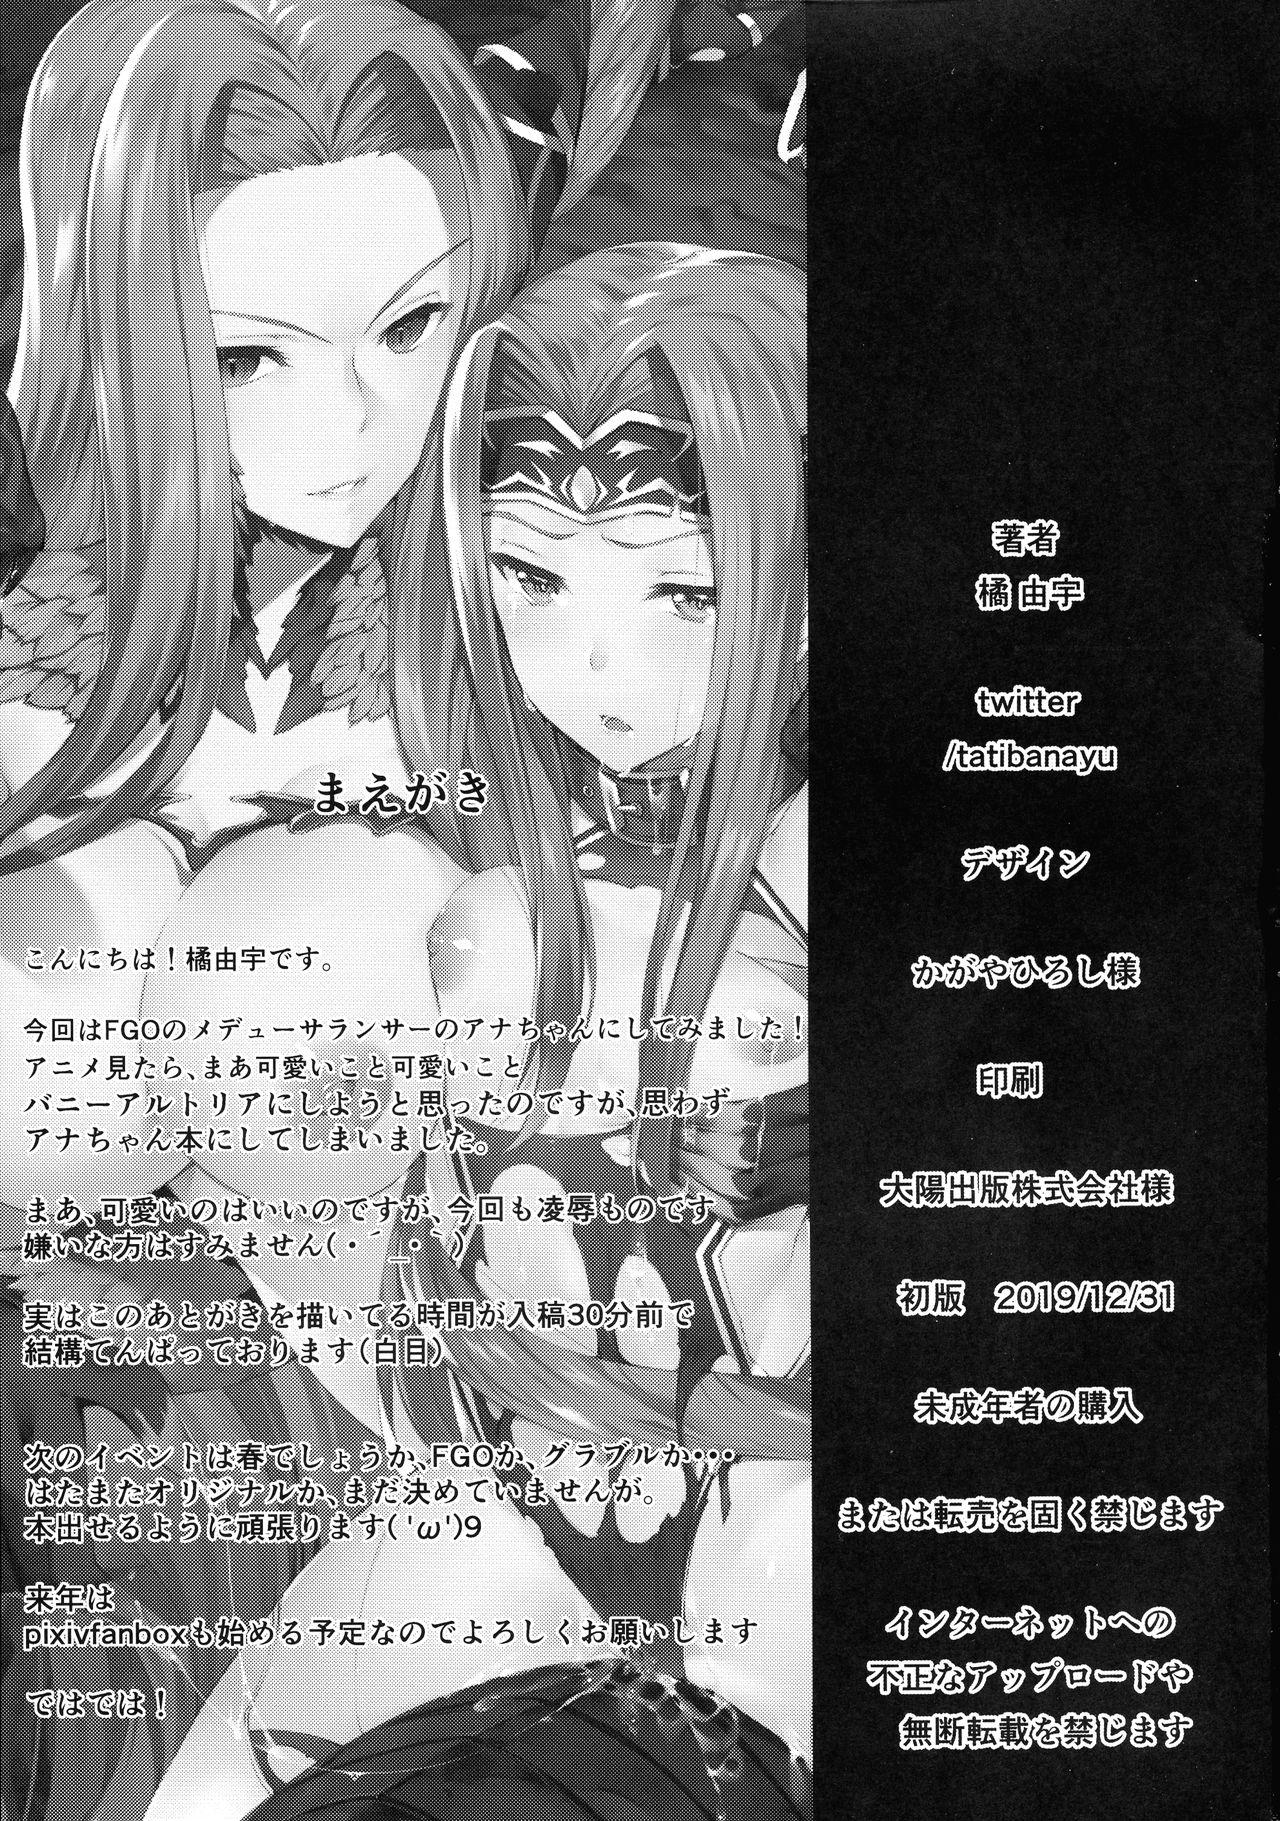 Matures Babylonia Darkness - Fate grand order Girls - Page 3